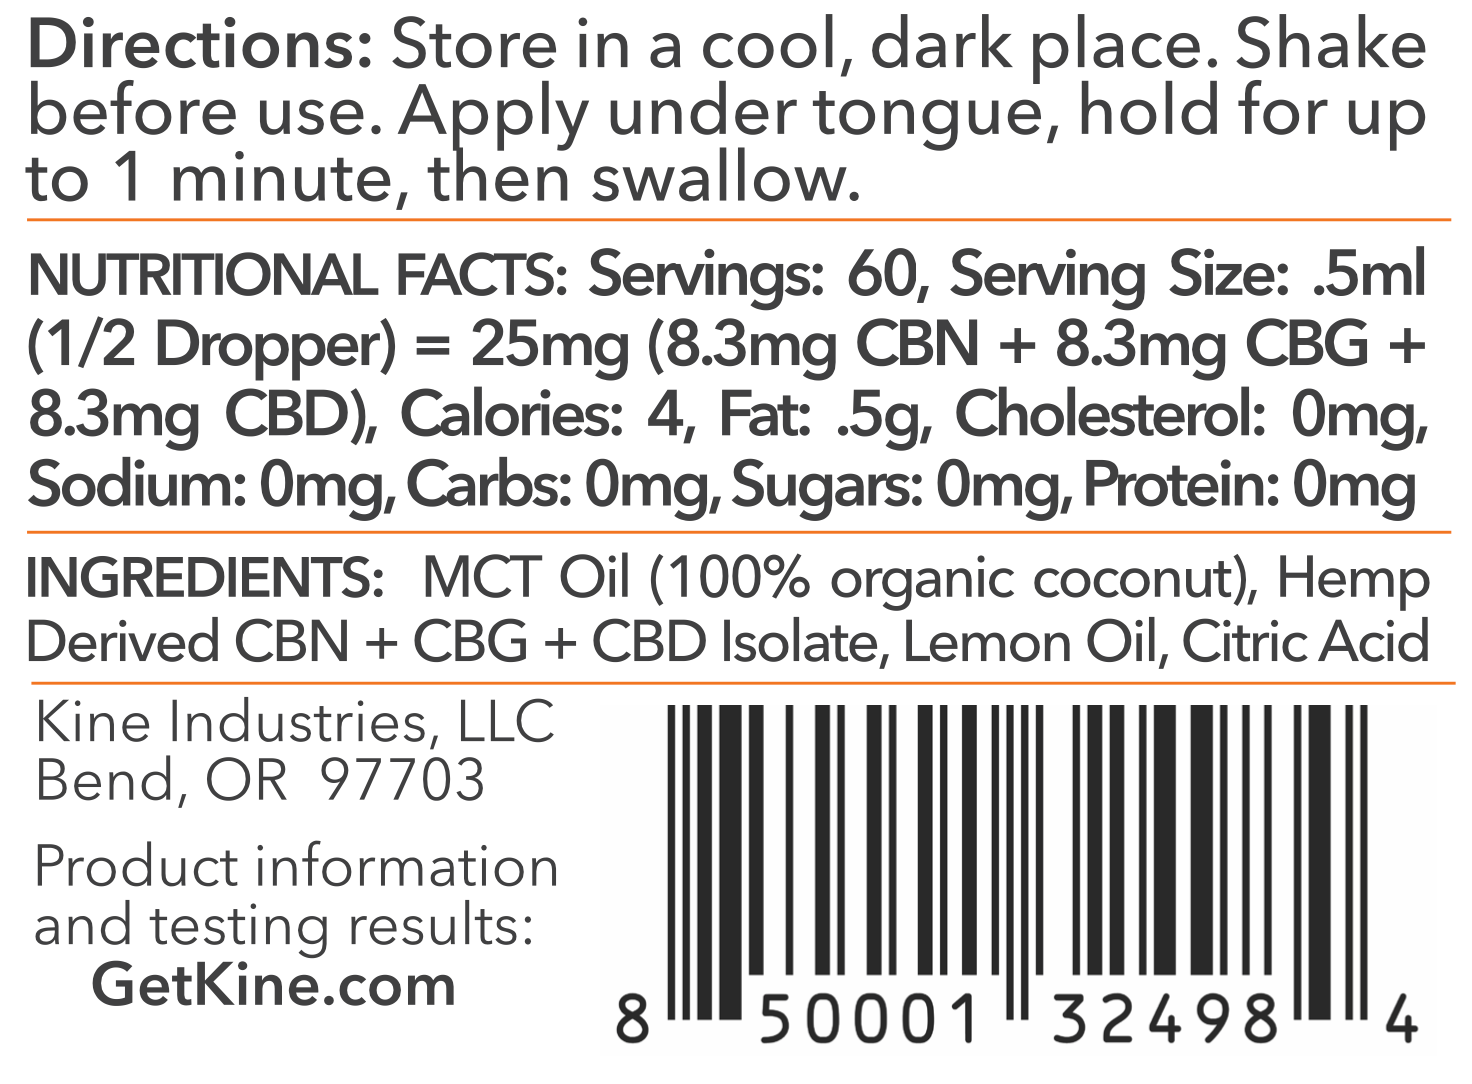 Kine Lemon flavored organic CBN/CBG/CBD 1:1:1 ratio 1500mg tincture drops Ingredients List and Nutritional Facts